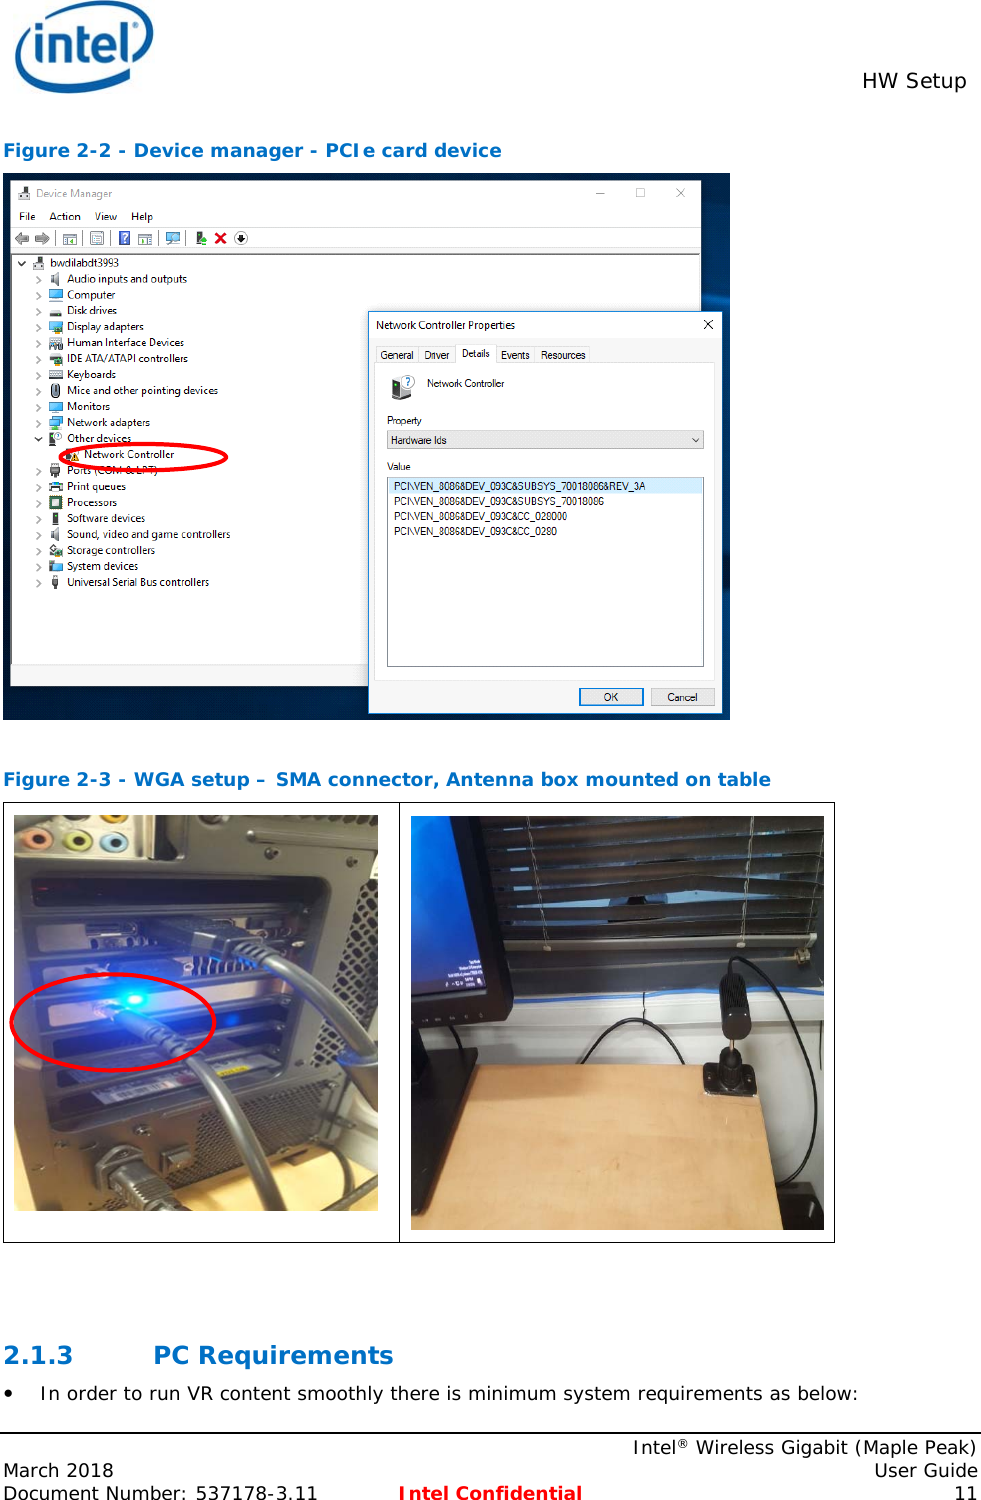  HW Setup    Intel® Wireless Gigabit (Maple Peak) March 2018    User Guide Document Number: 537178-3.11  Intel Confidential 11 Figure 2-2 - Device manager - PCIe card device   Figure 2-3 - WGA setup – SMA connector, Antenna box mounted on table     2.1.3 PC Requirements  In order to run VR content smoothly there is minimum system requirements as below: 